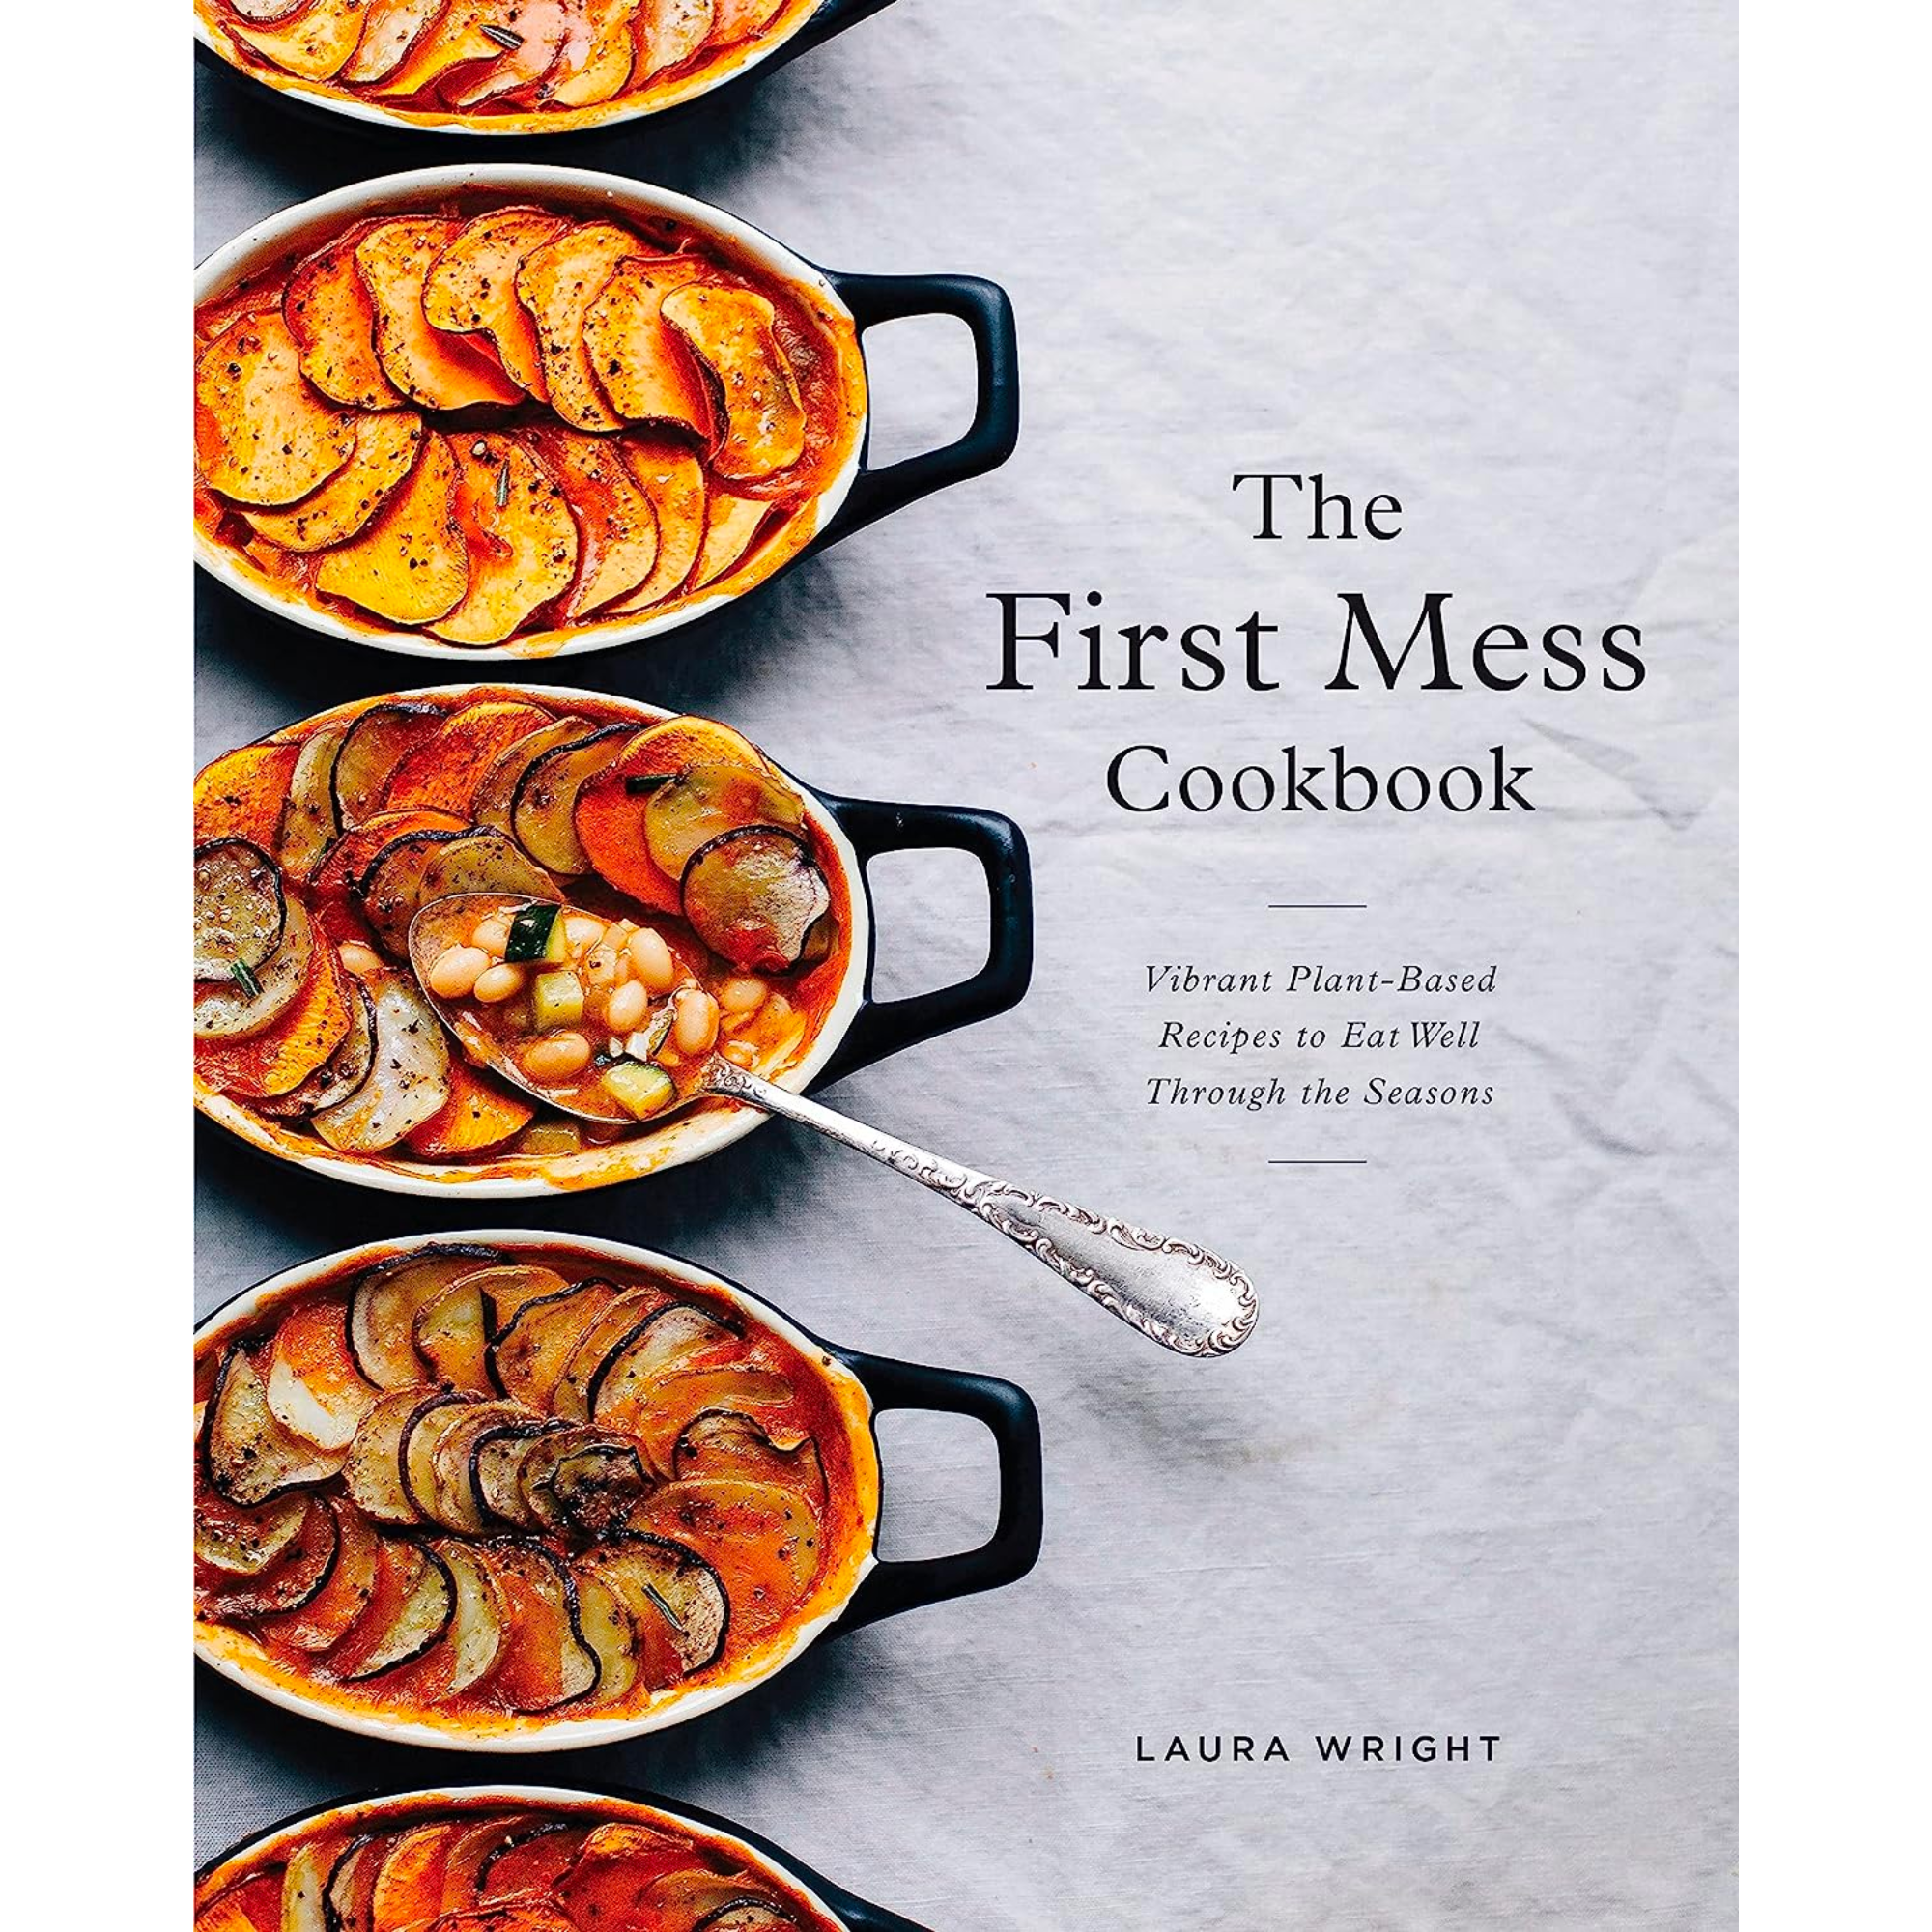 The First Mess Cookbook by Laura Wright